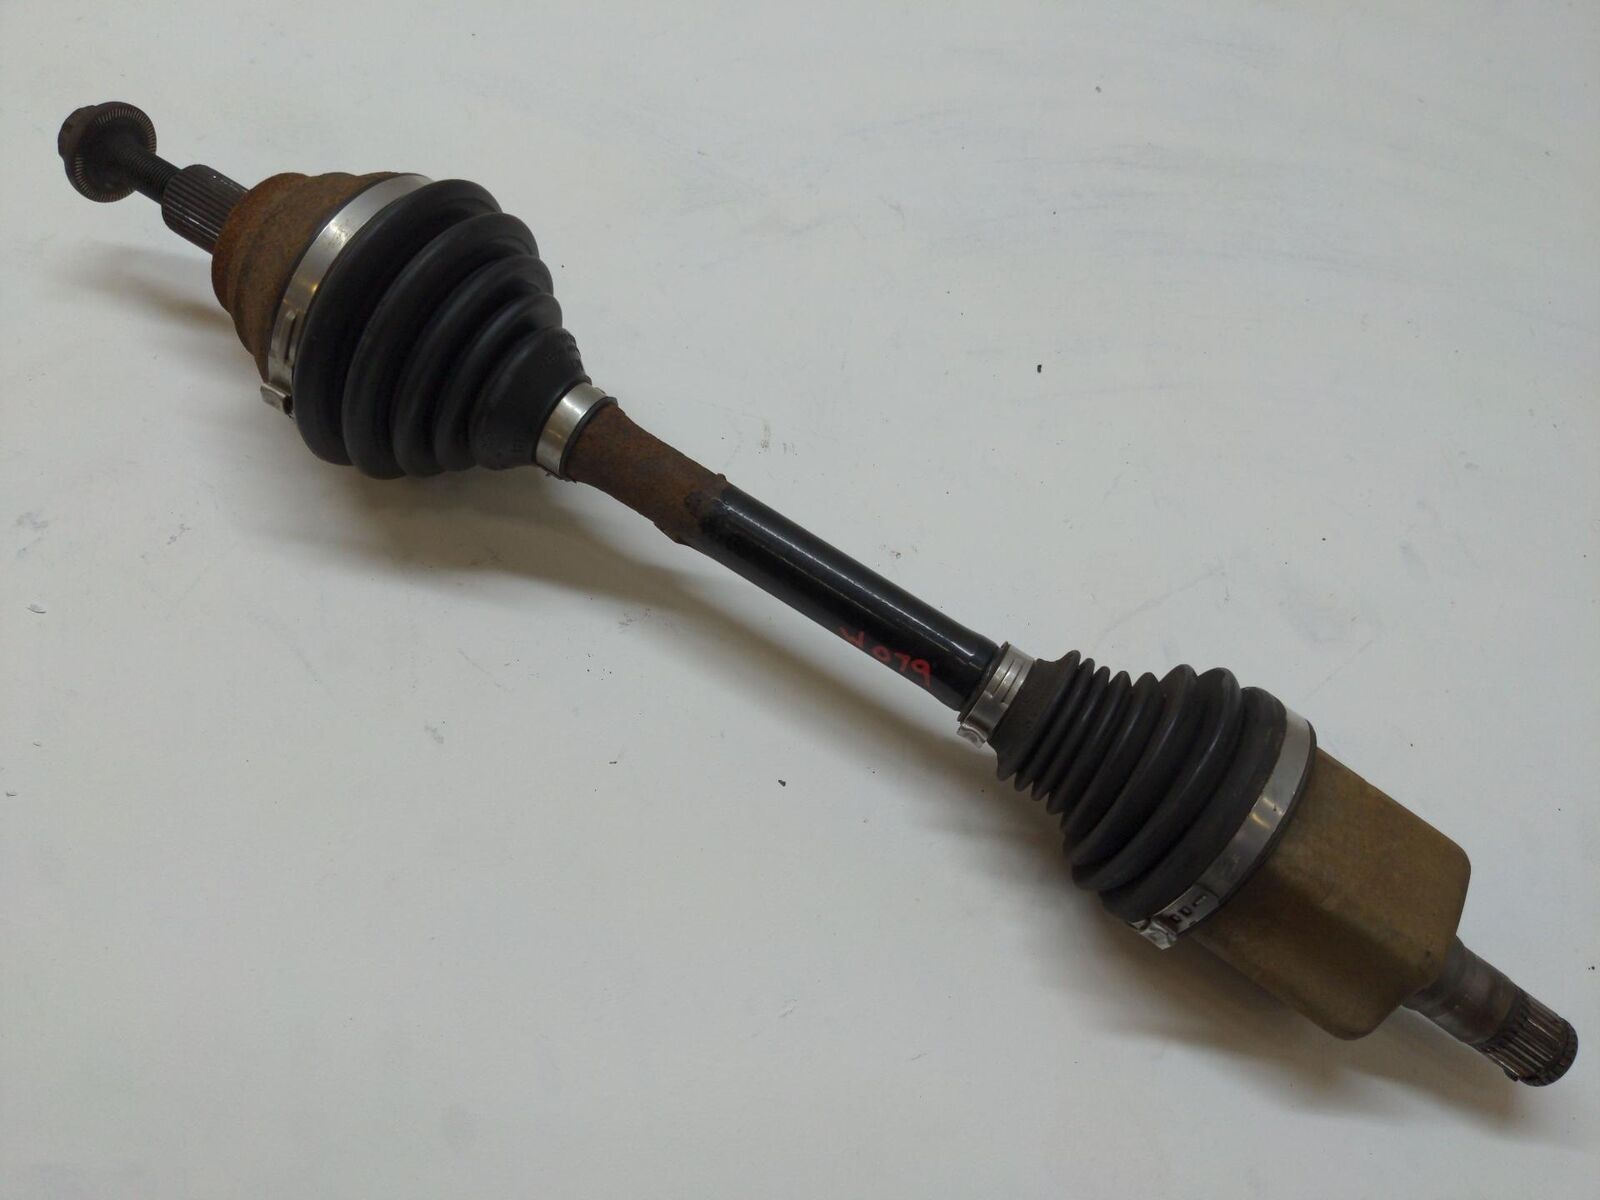 09-18 VW TIGUAN Front Left Axle Shaft Lh 5n0407761n 135K KMs AWD 4Motion AT